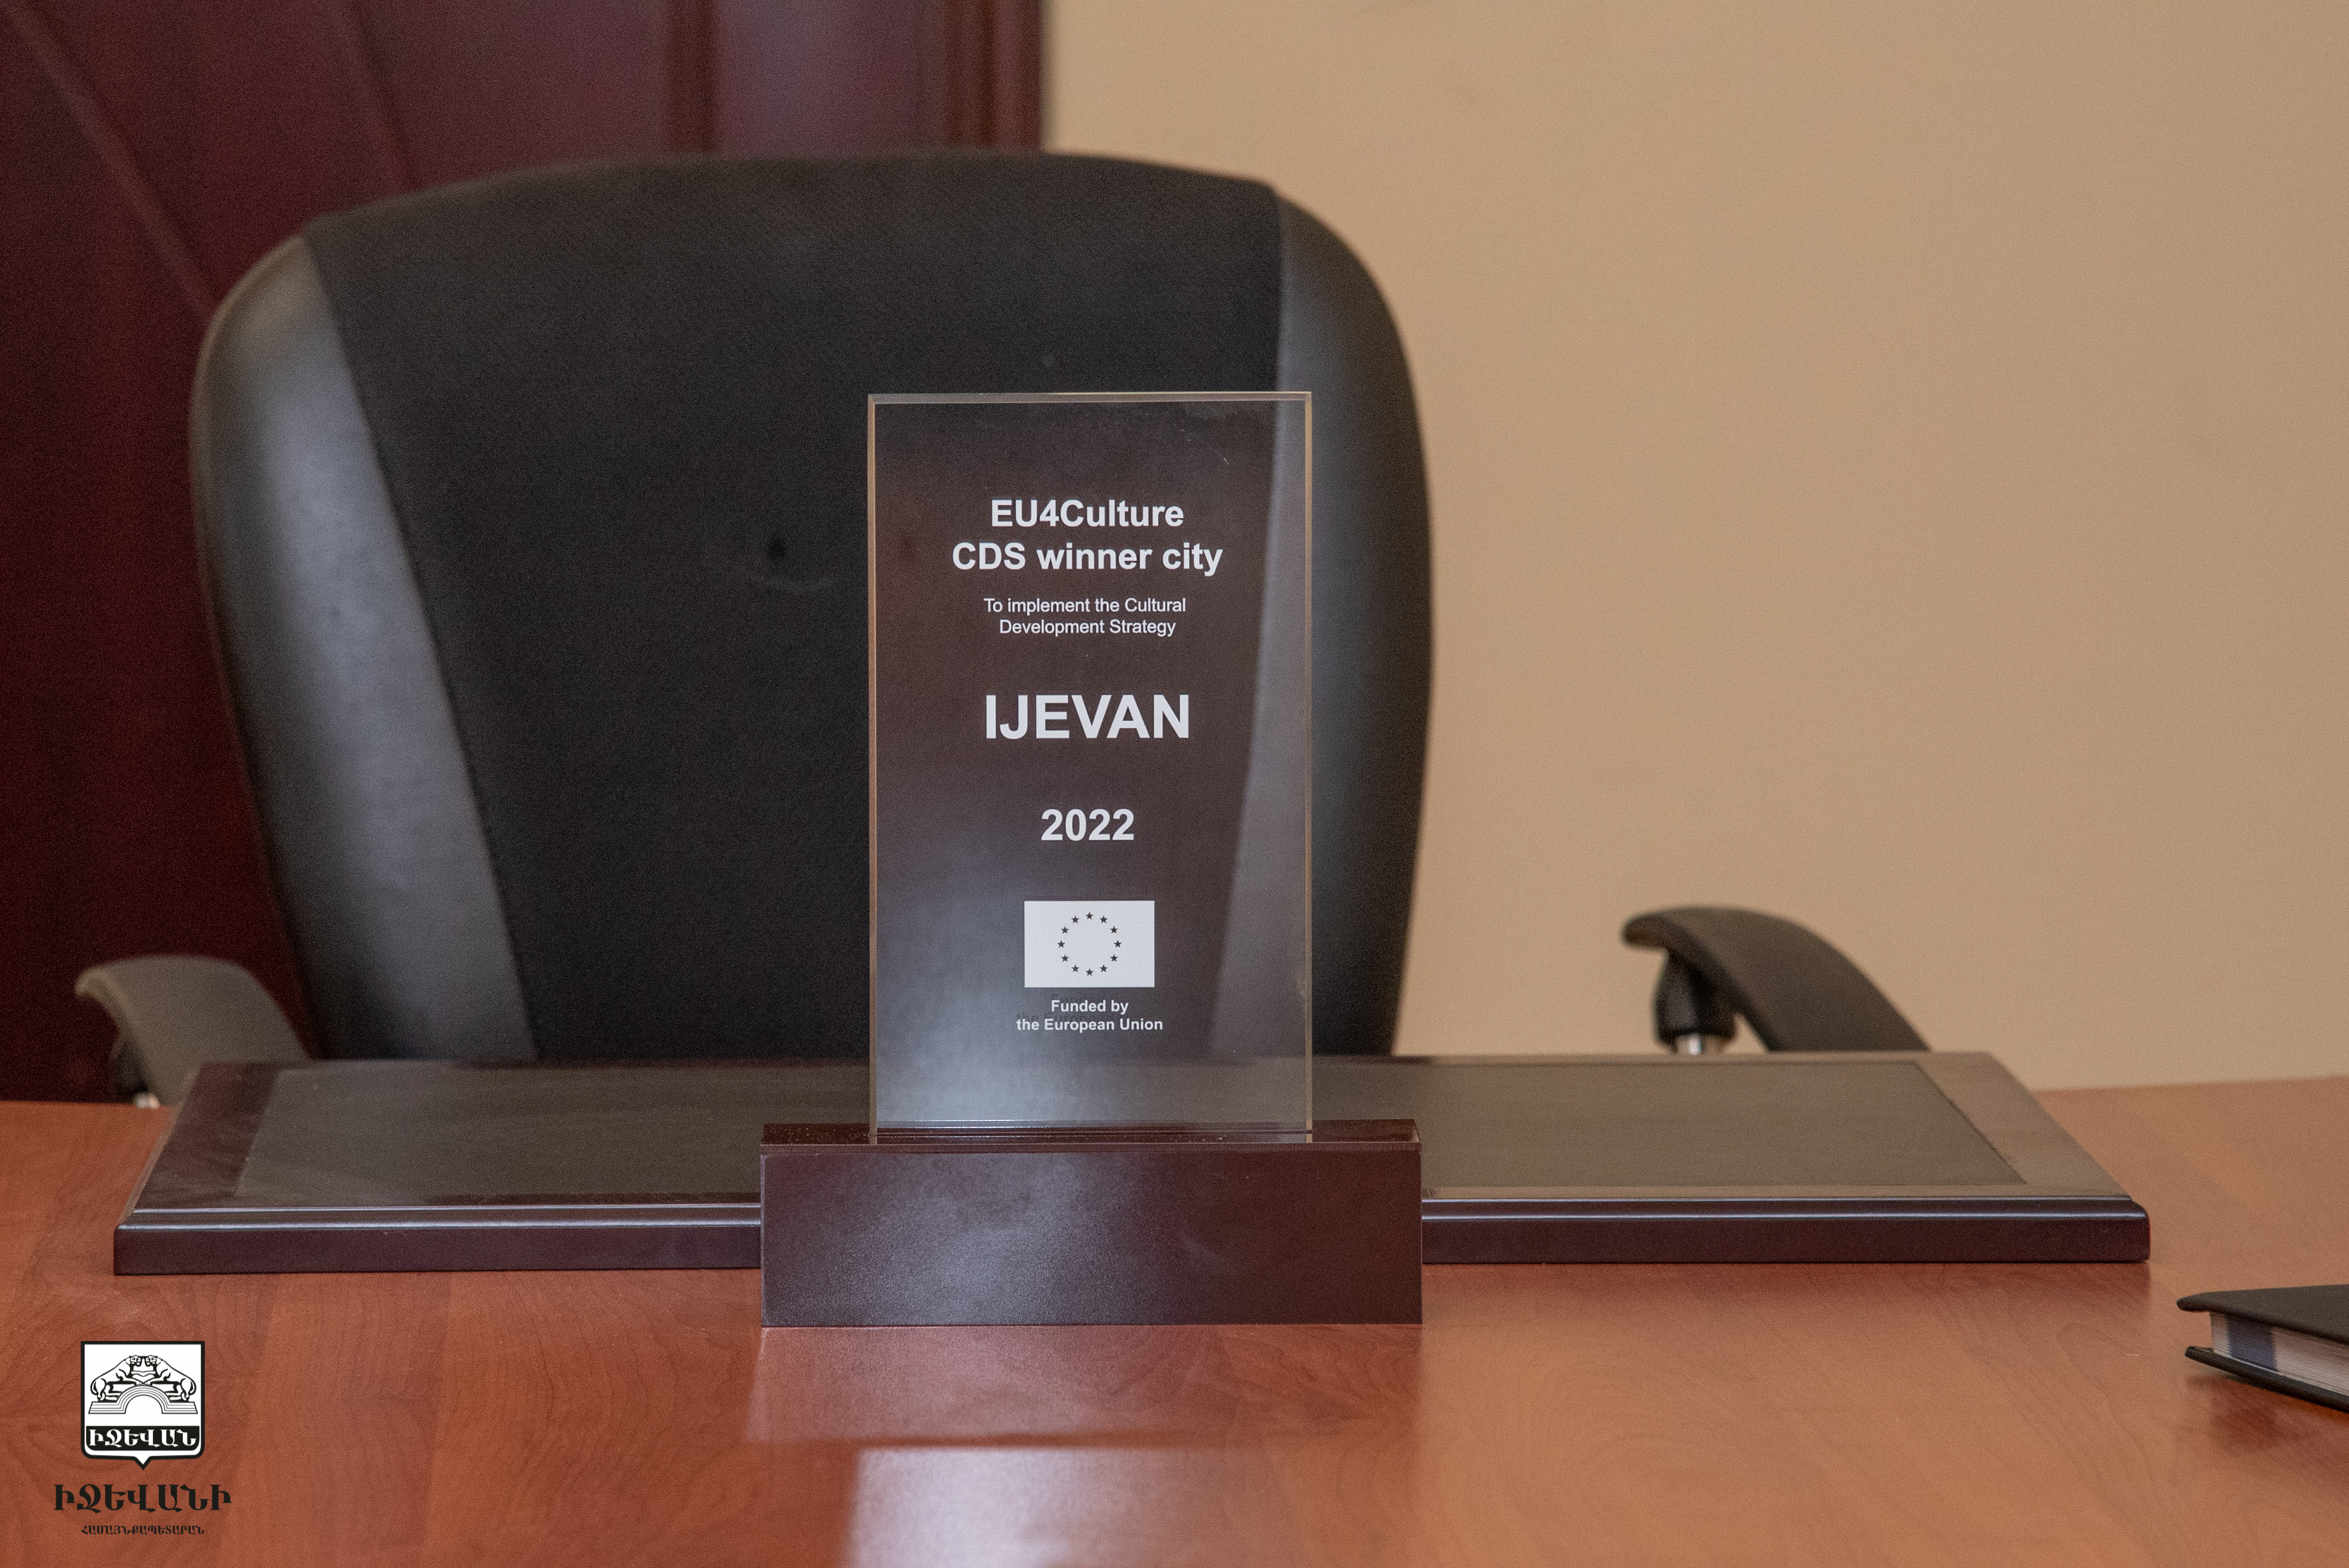 The city of Ijevan has won the EU4Culture project competition